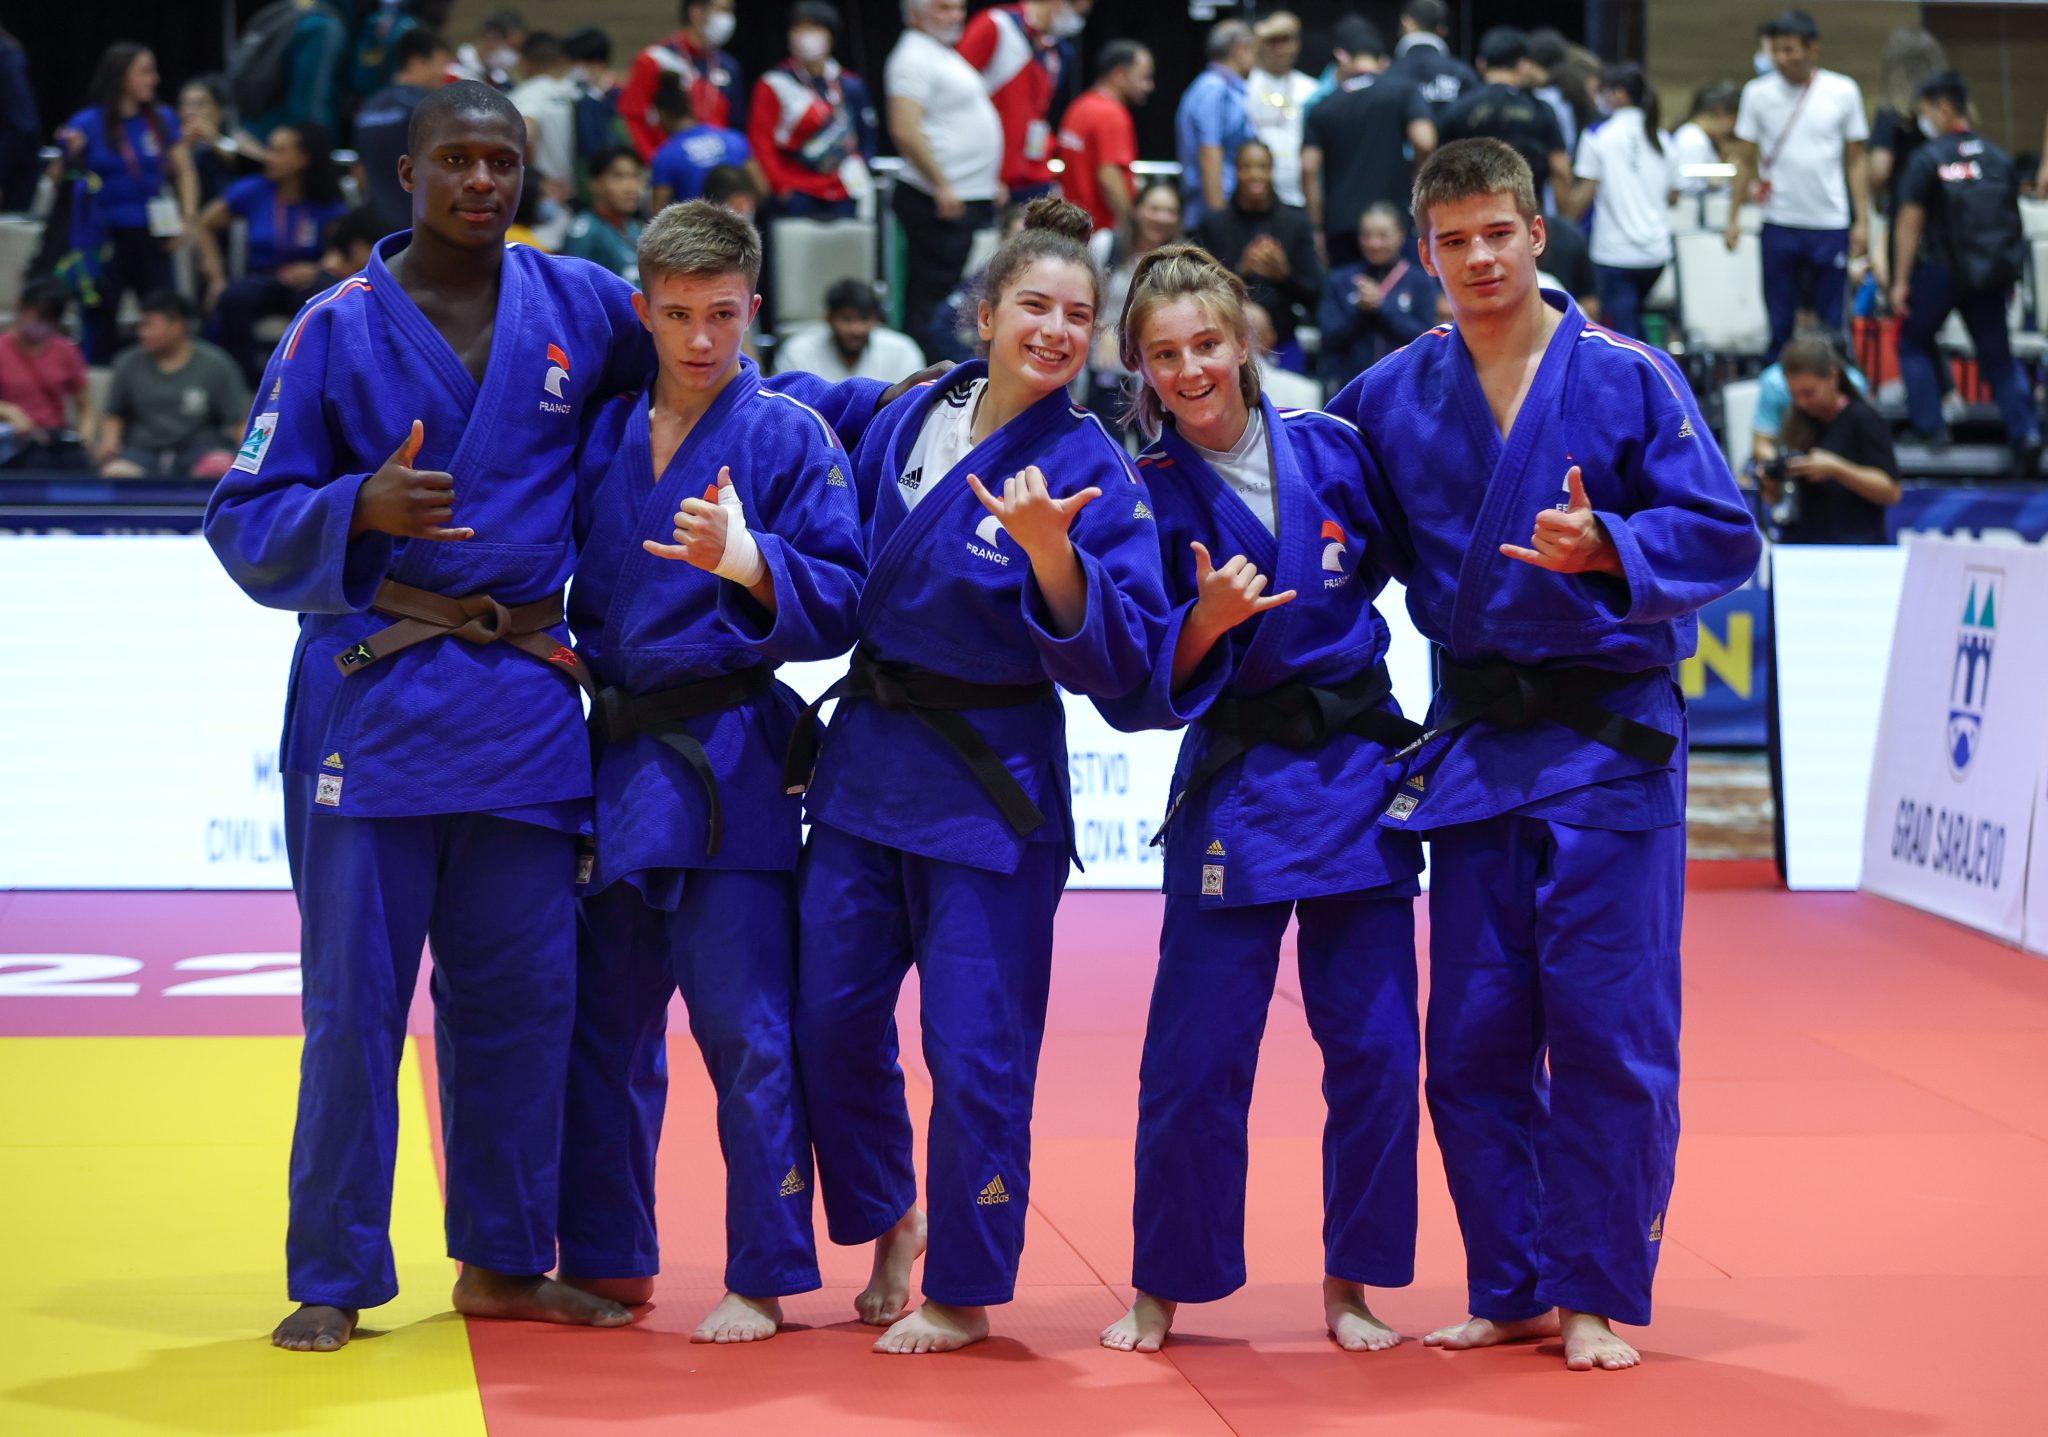 FRANCE BECOME CADET MIXED TEAM WORLD CHAMPIONS